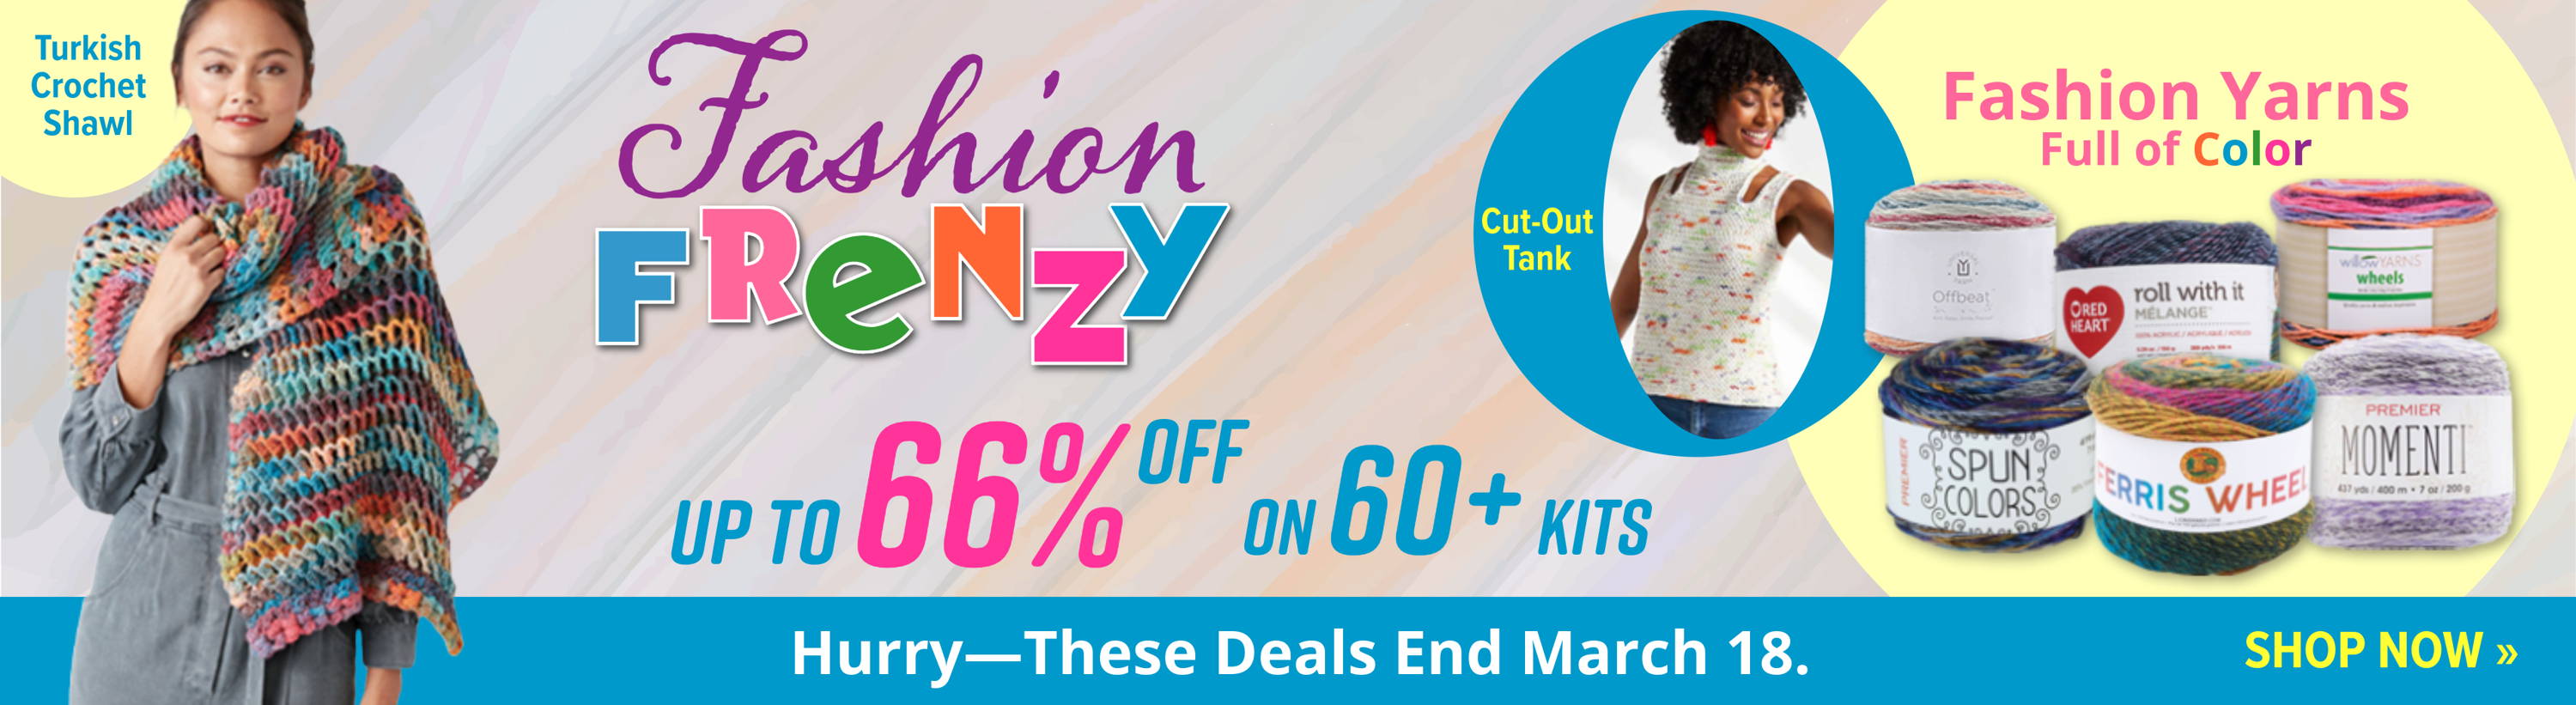 Fashion Frenzy: Up to 66% Off on 60+ Kits. Featuring images of Turkish Crochet Shawl and Cut-Out Tank. Fashion Yarns Full of Color. Hurry - These Deals End March 18. Shop Now.